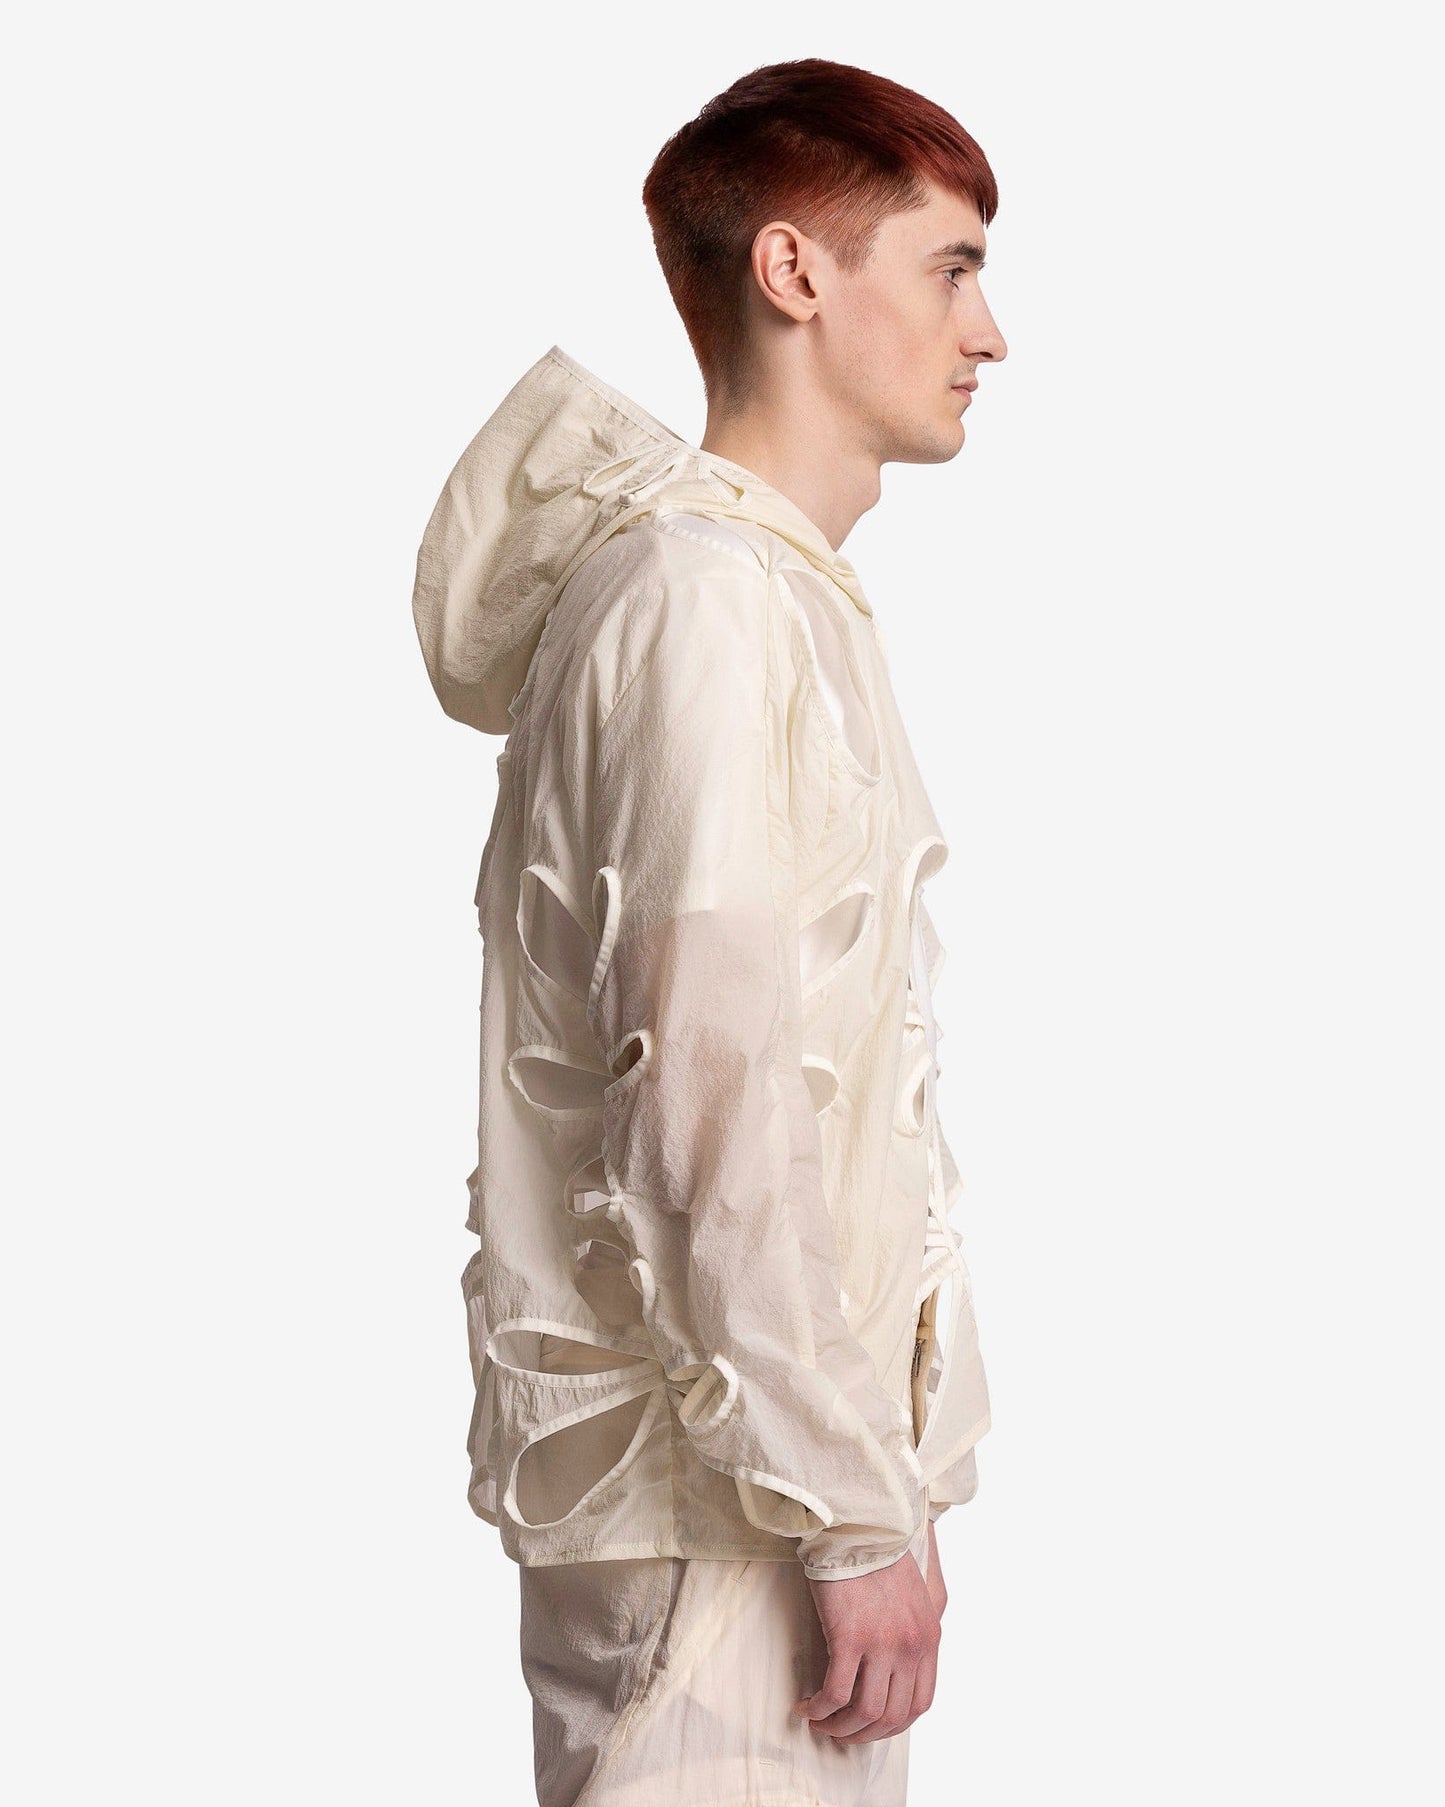 POST ARCHIVE FACTION (P.A.F) Men's Jackets 5.0+ Technical Jacket Left in Ivory